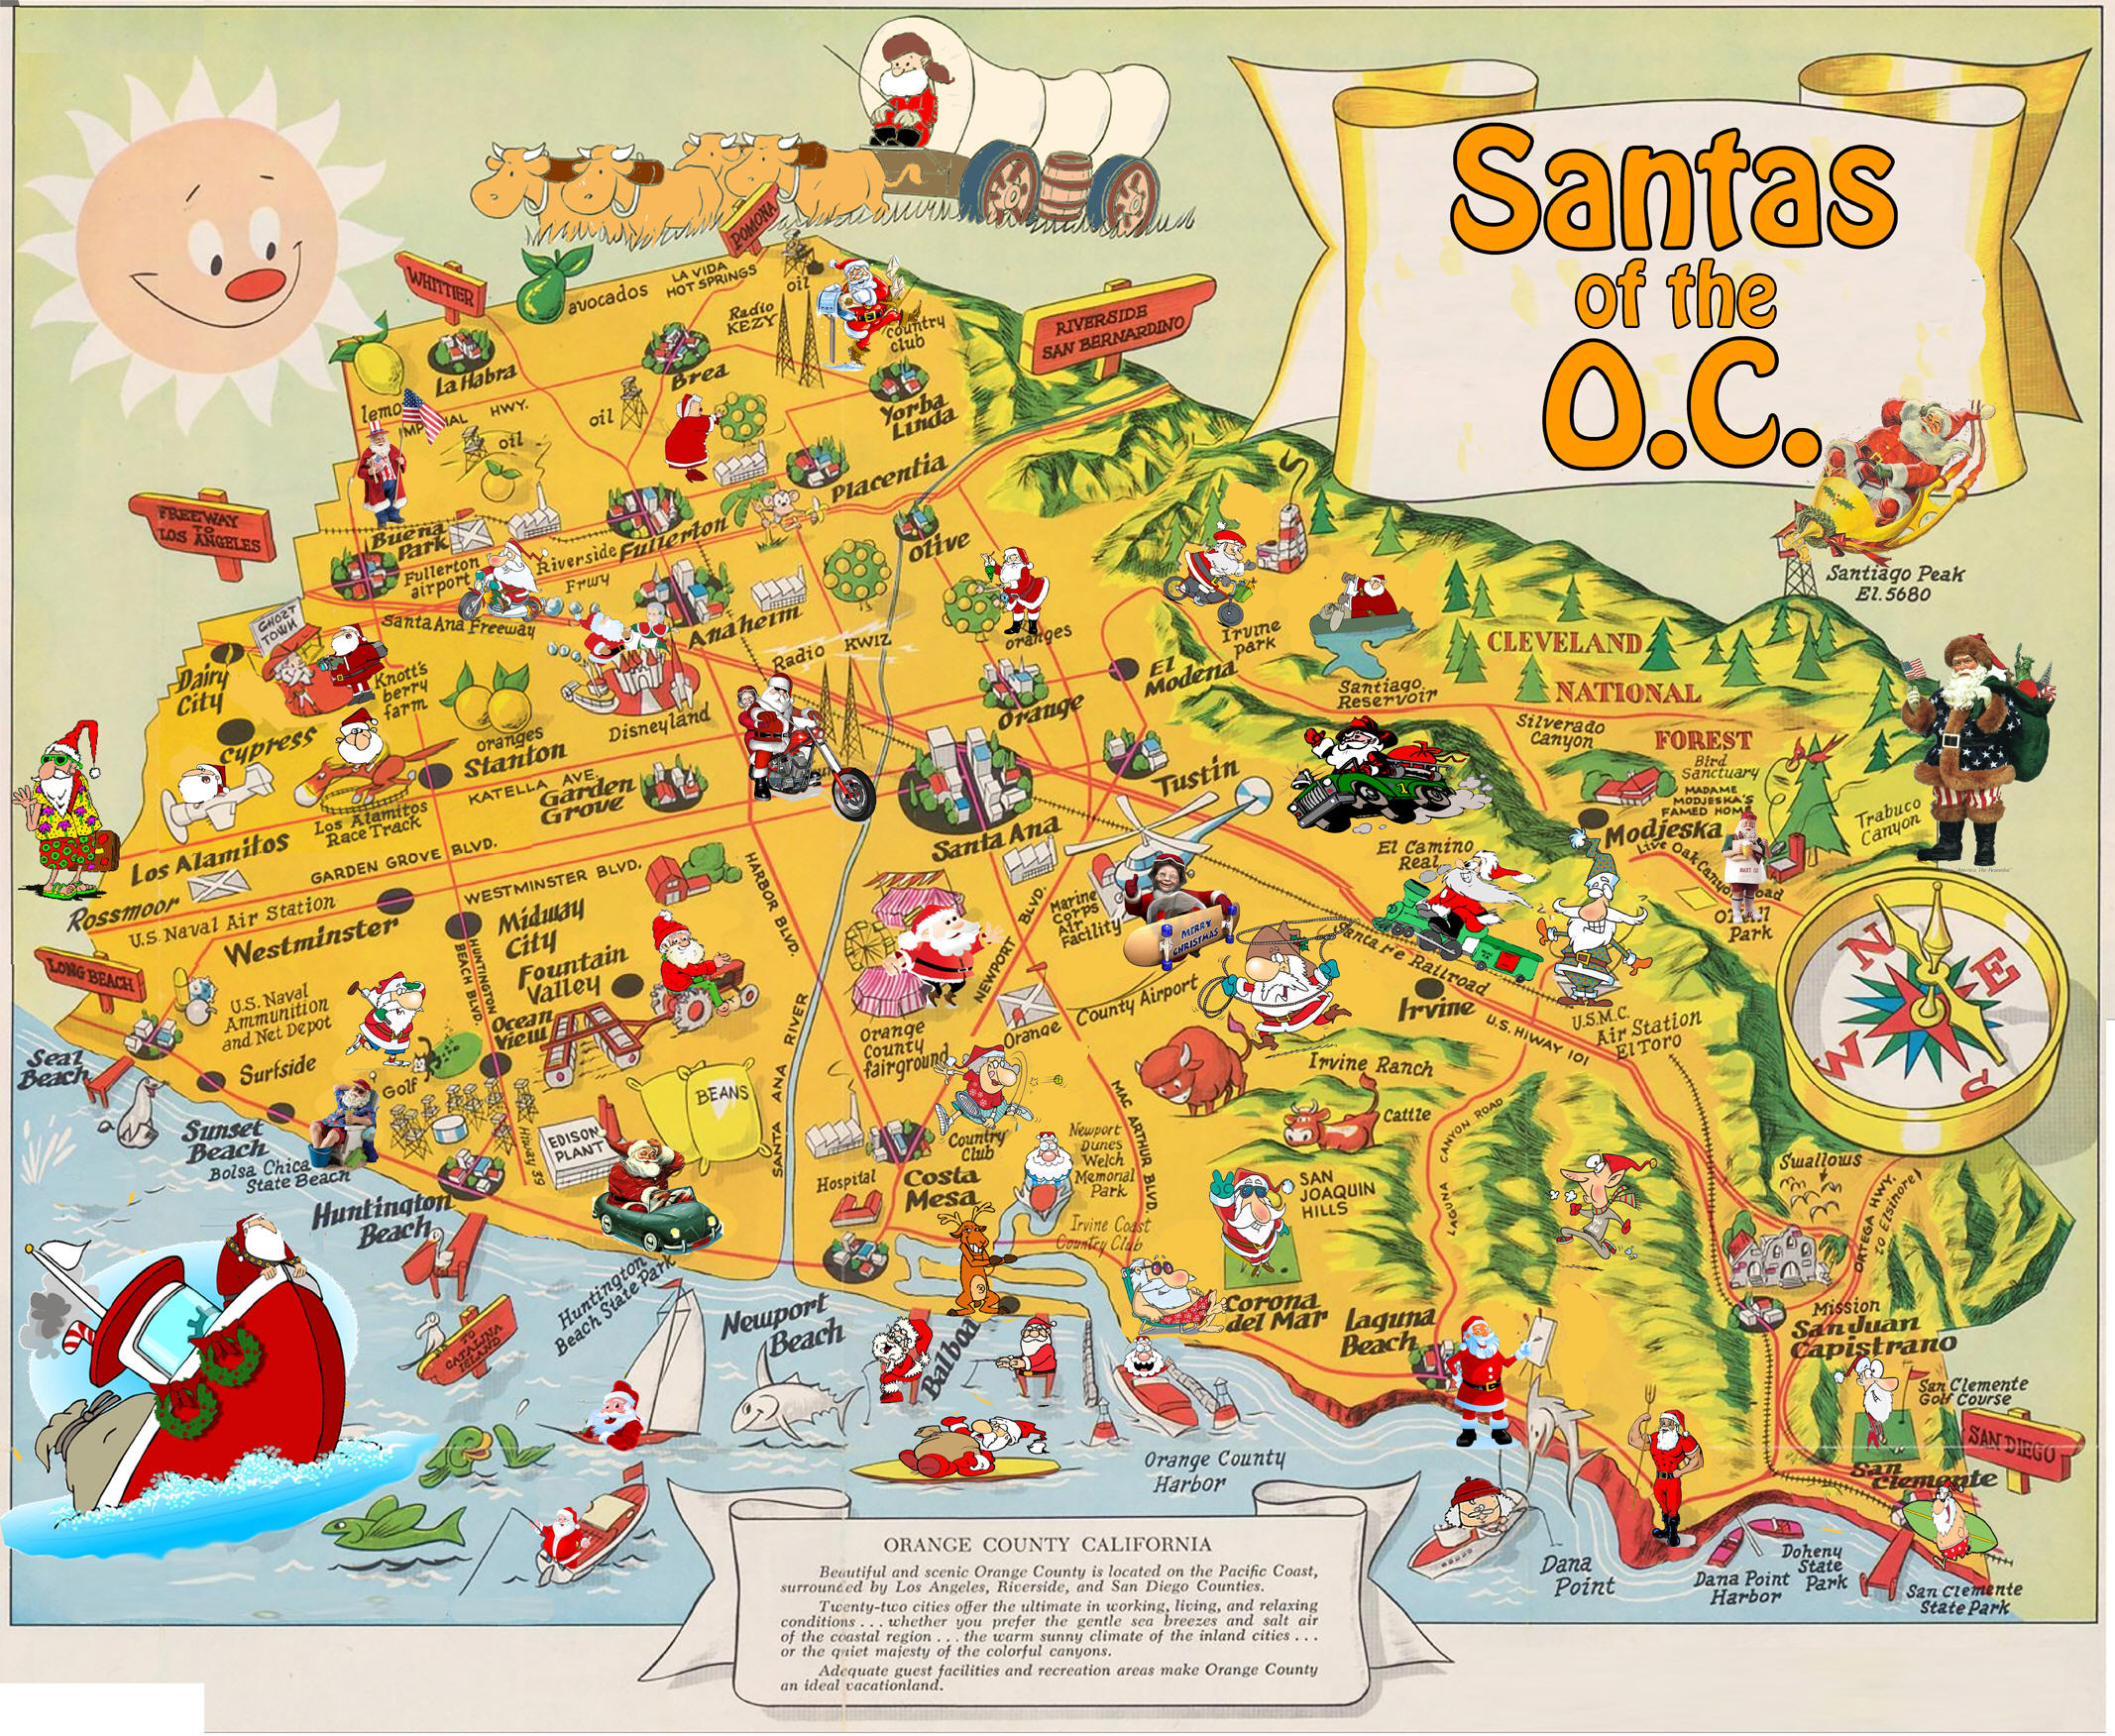 Santas of the OC Pictorial Map